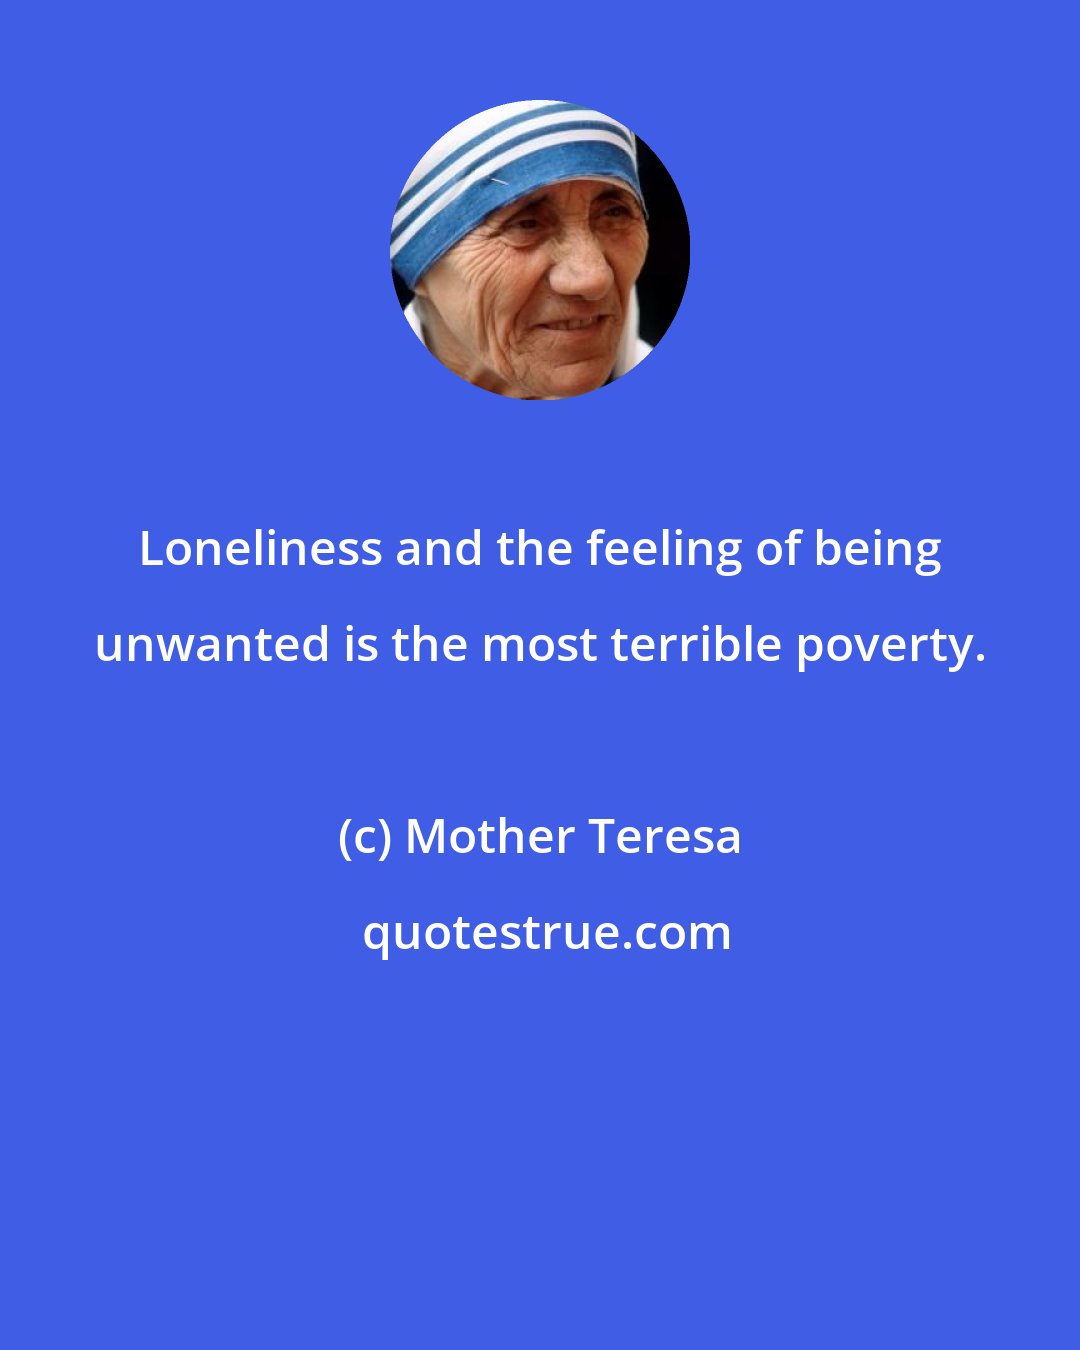 Mother Teresa: Loneliness and the feeling of being unwanted is the most terrible poverty.